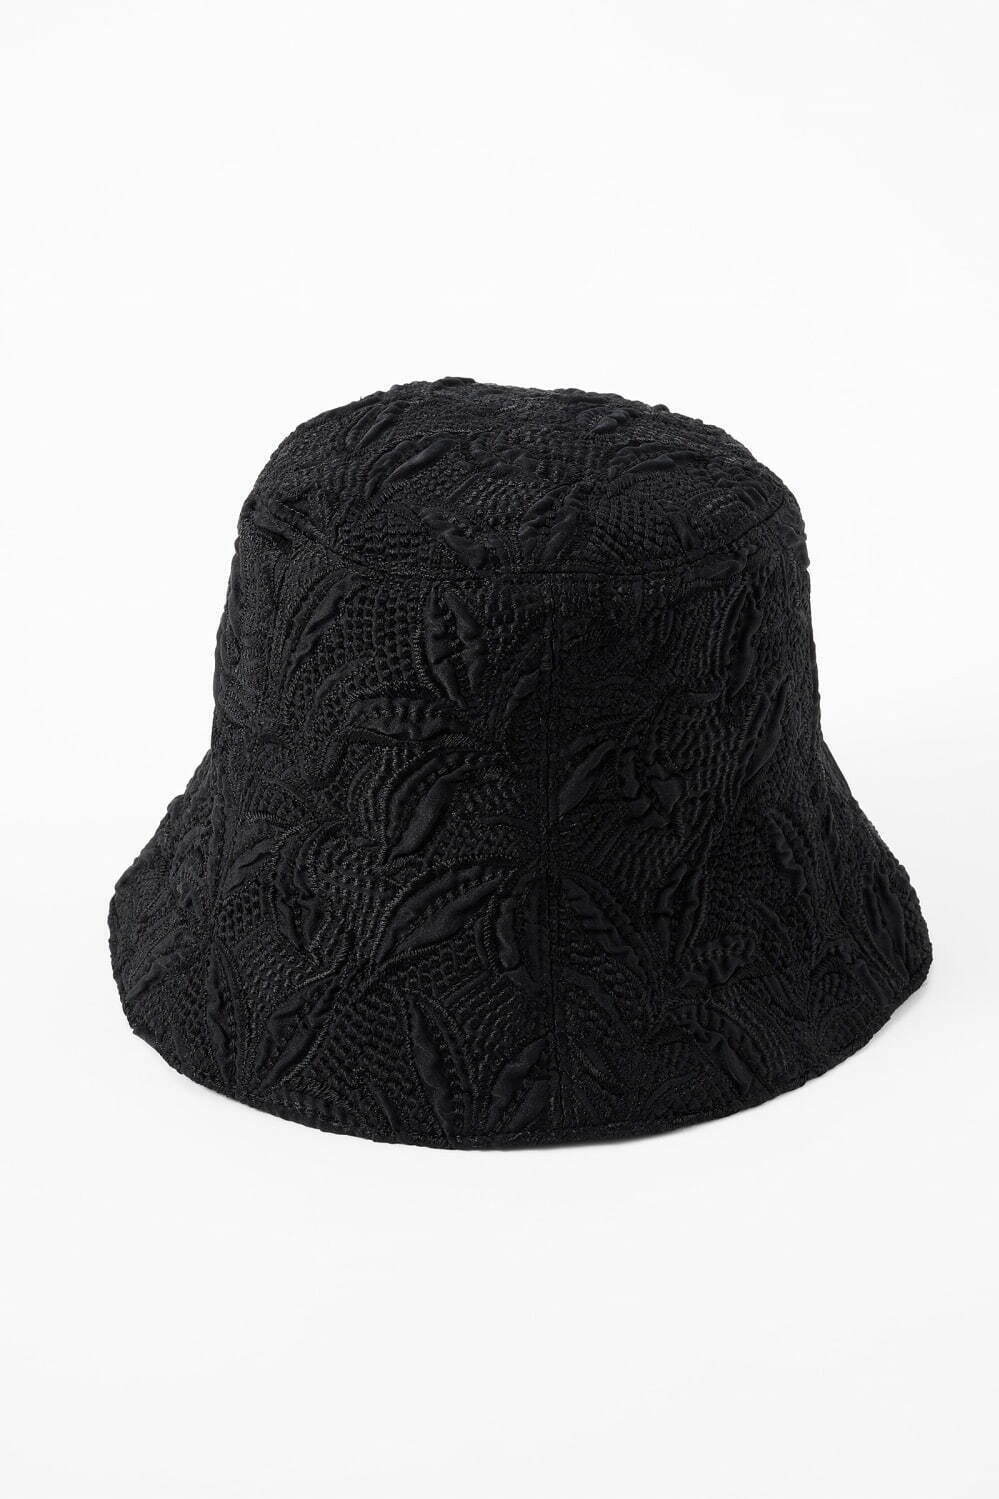 Thawing embroidery hat 15,400円